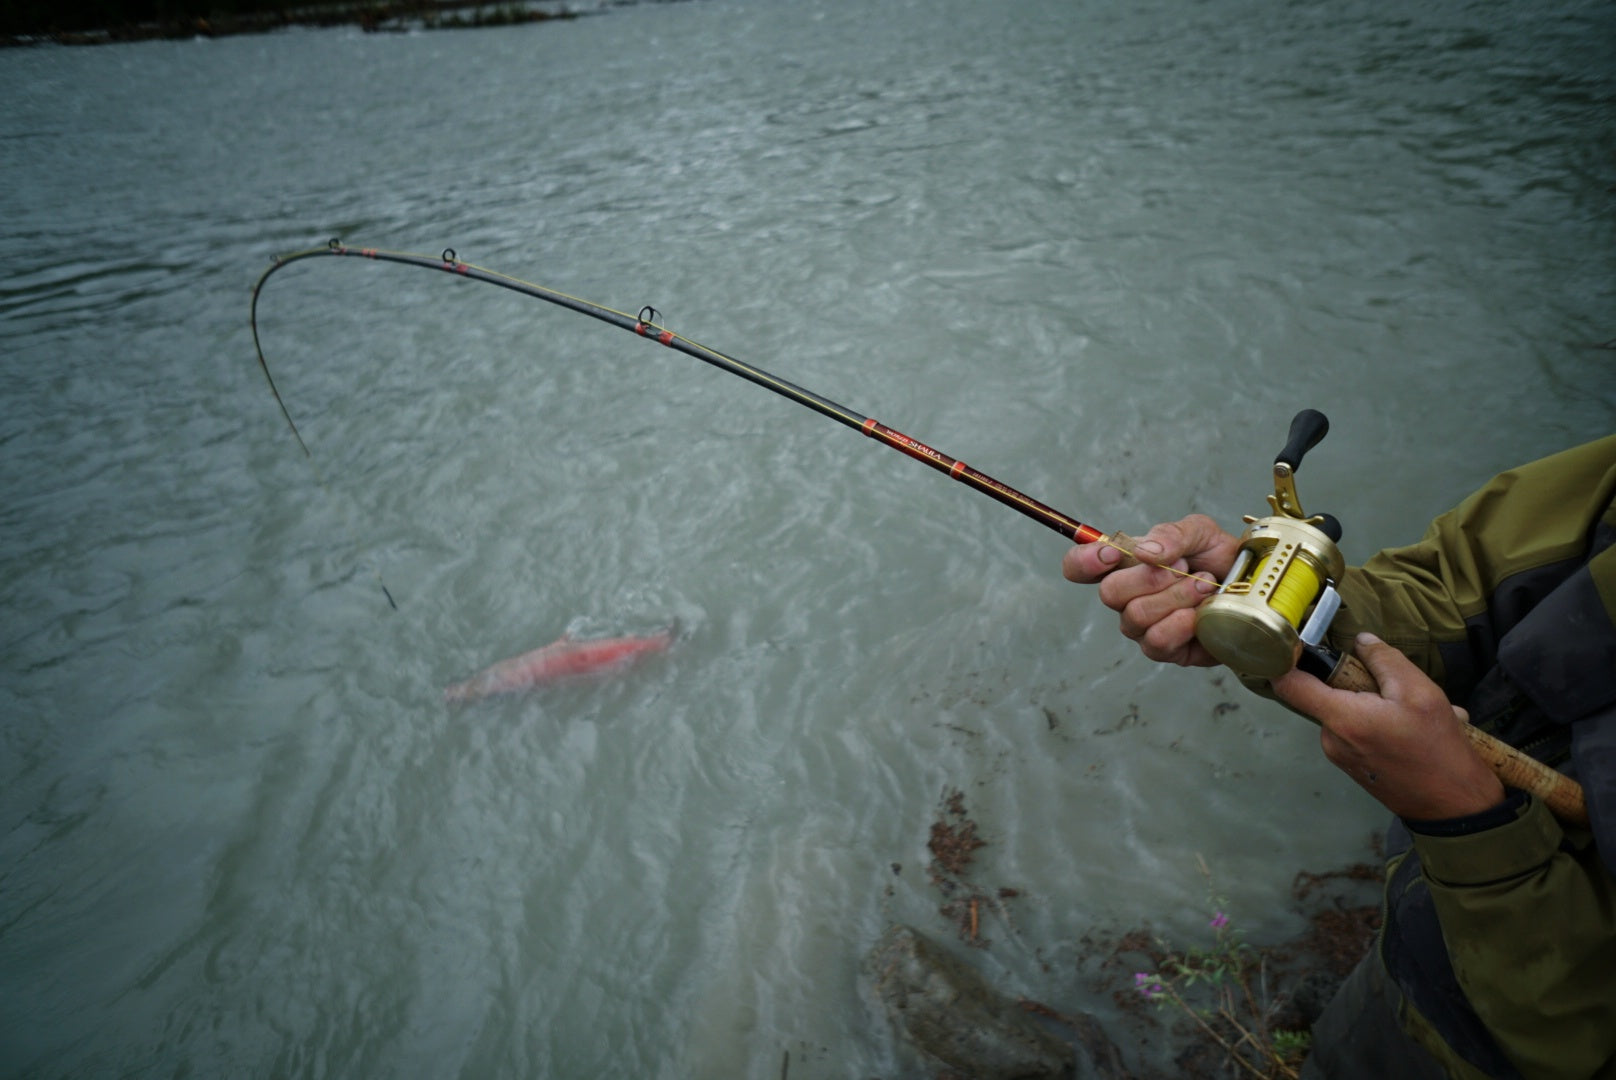 An angler is holding onto their pole and has caught a fish on their line. 